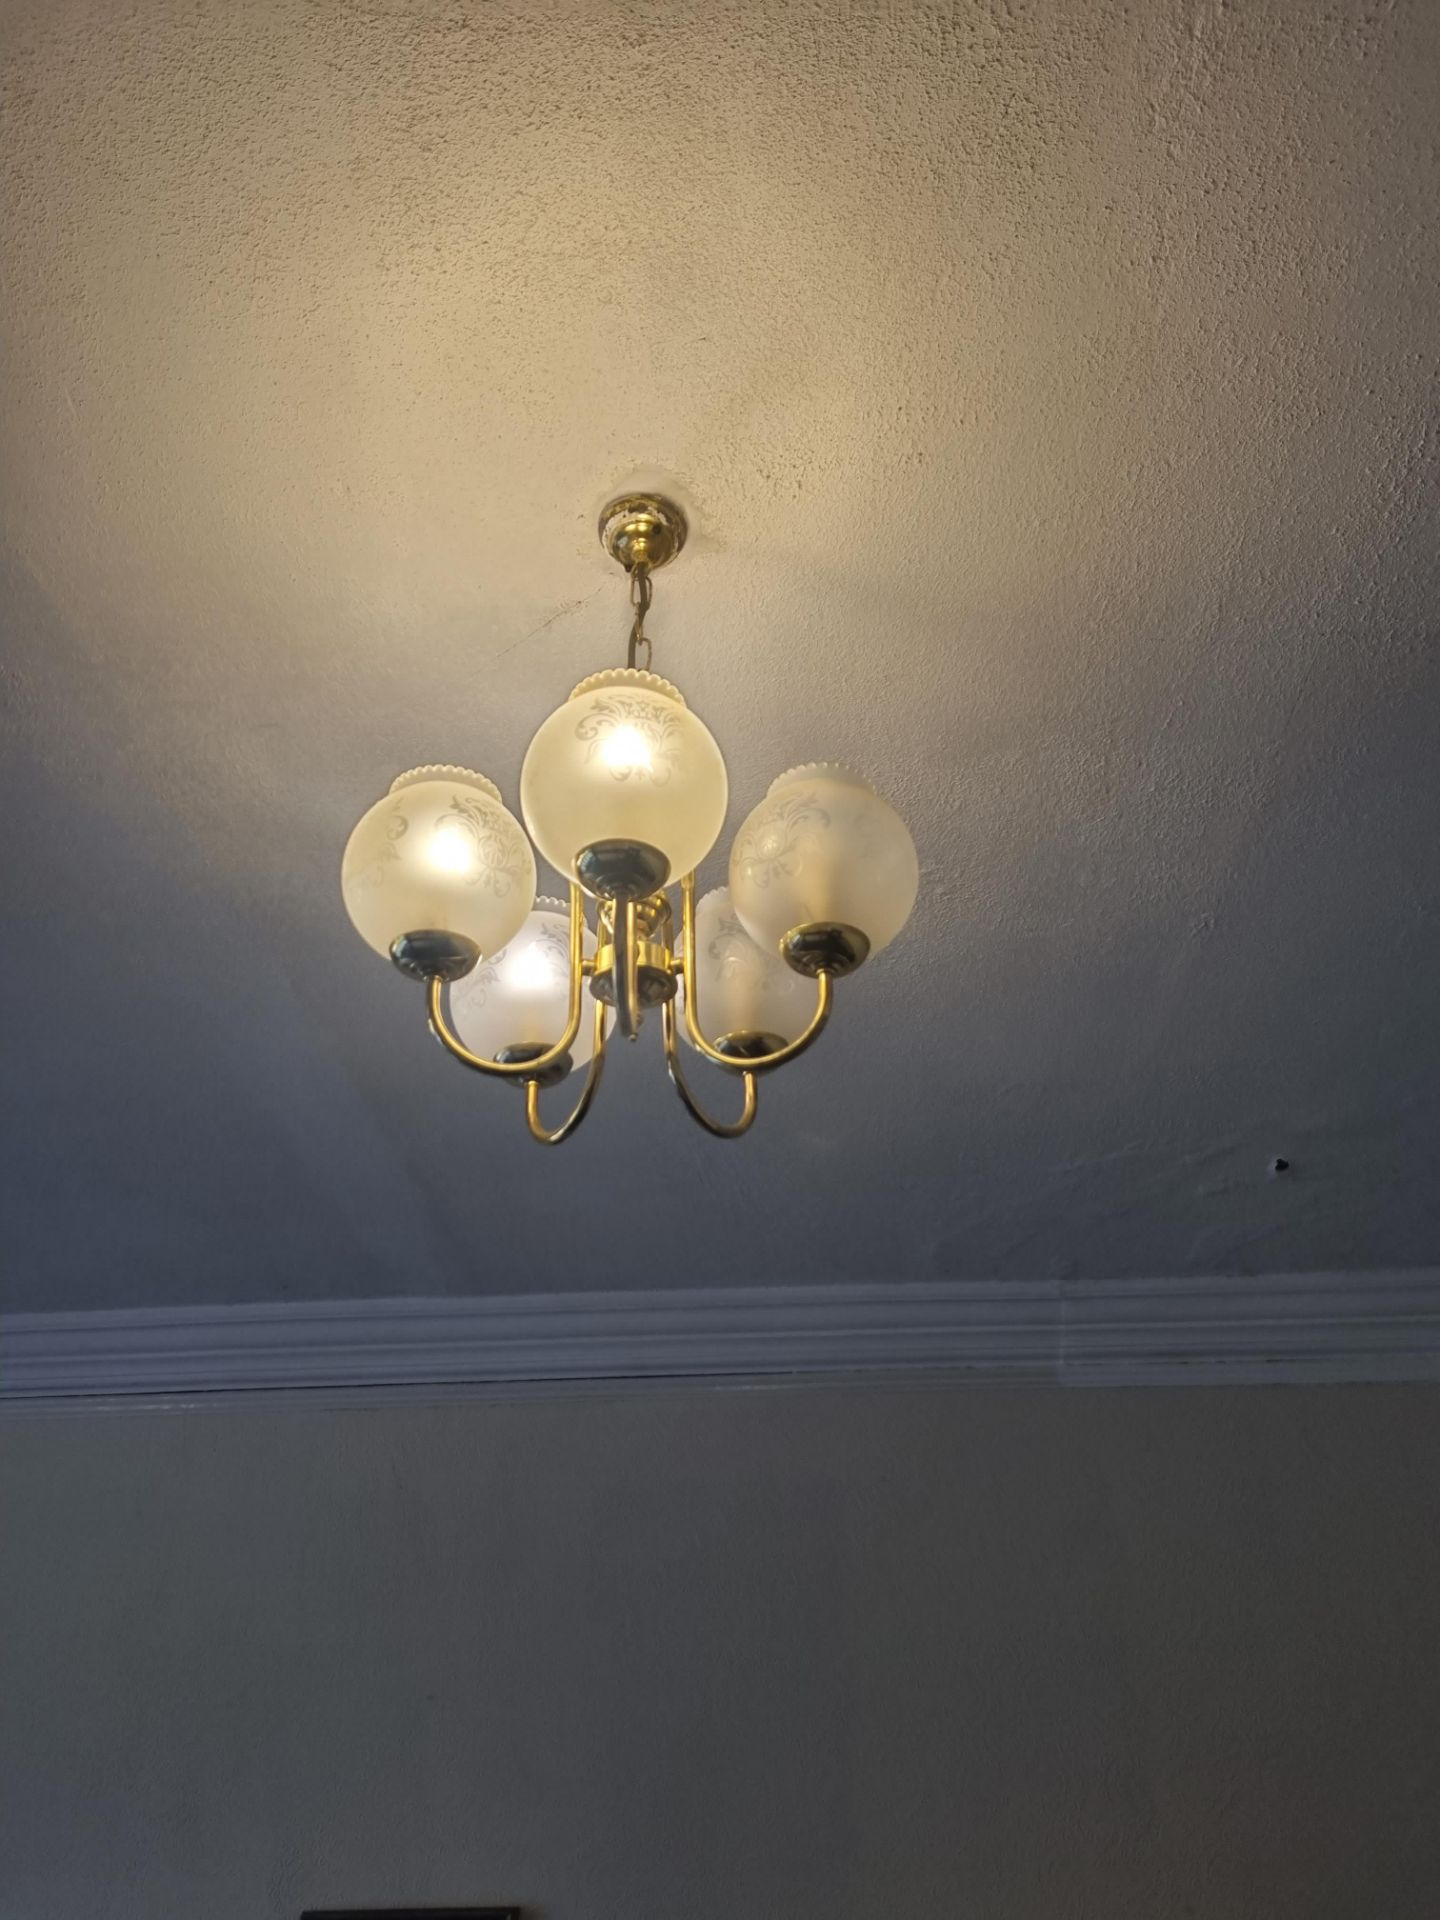 A Pair Of 5 Arm Chandeliers With Frosted Glass Shades D 600mm W 400mm - Bild 2 aus 2